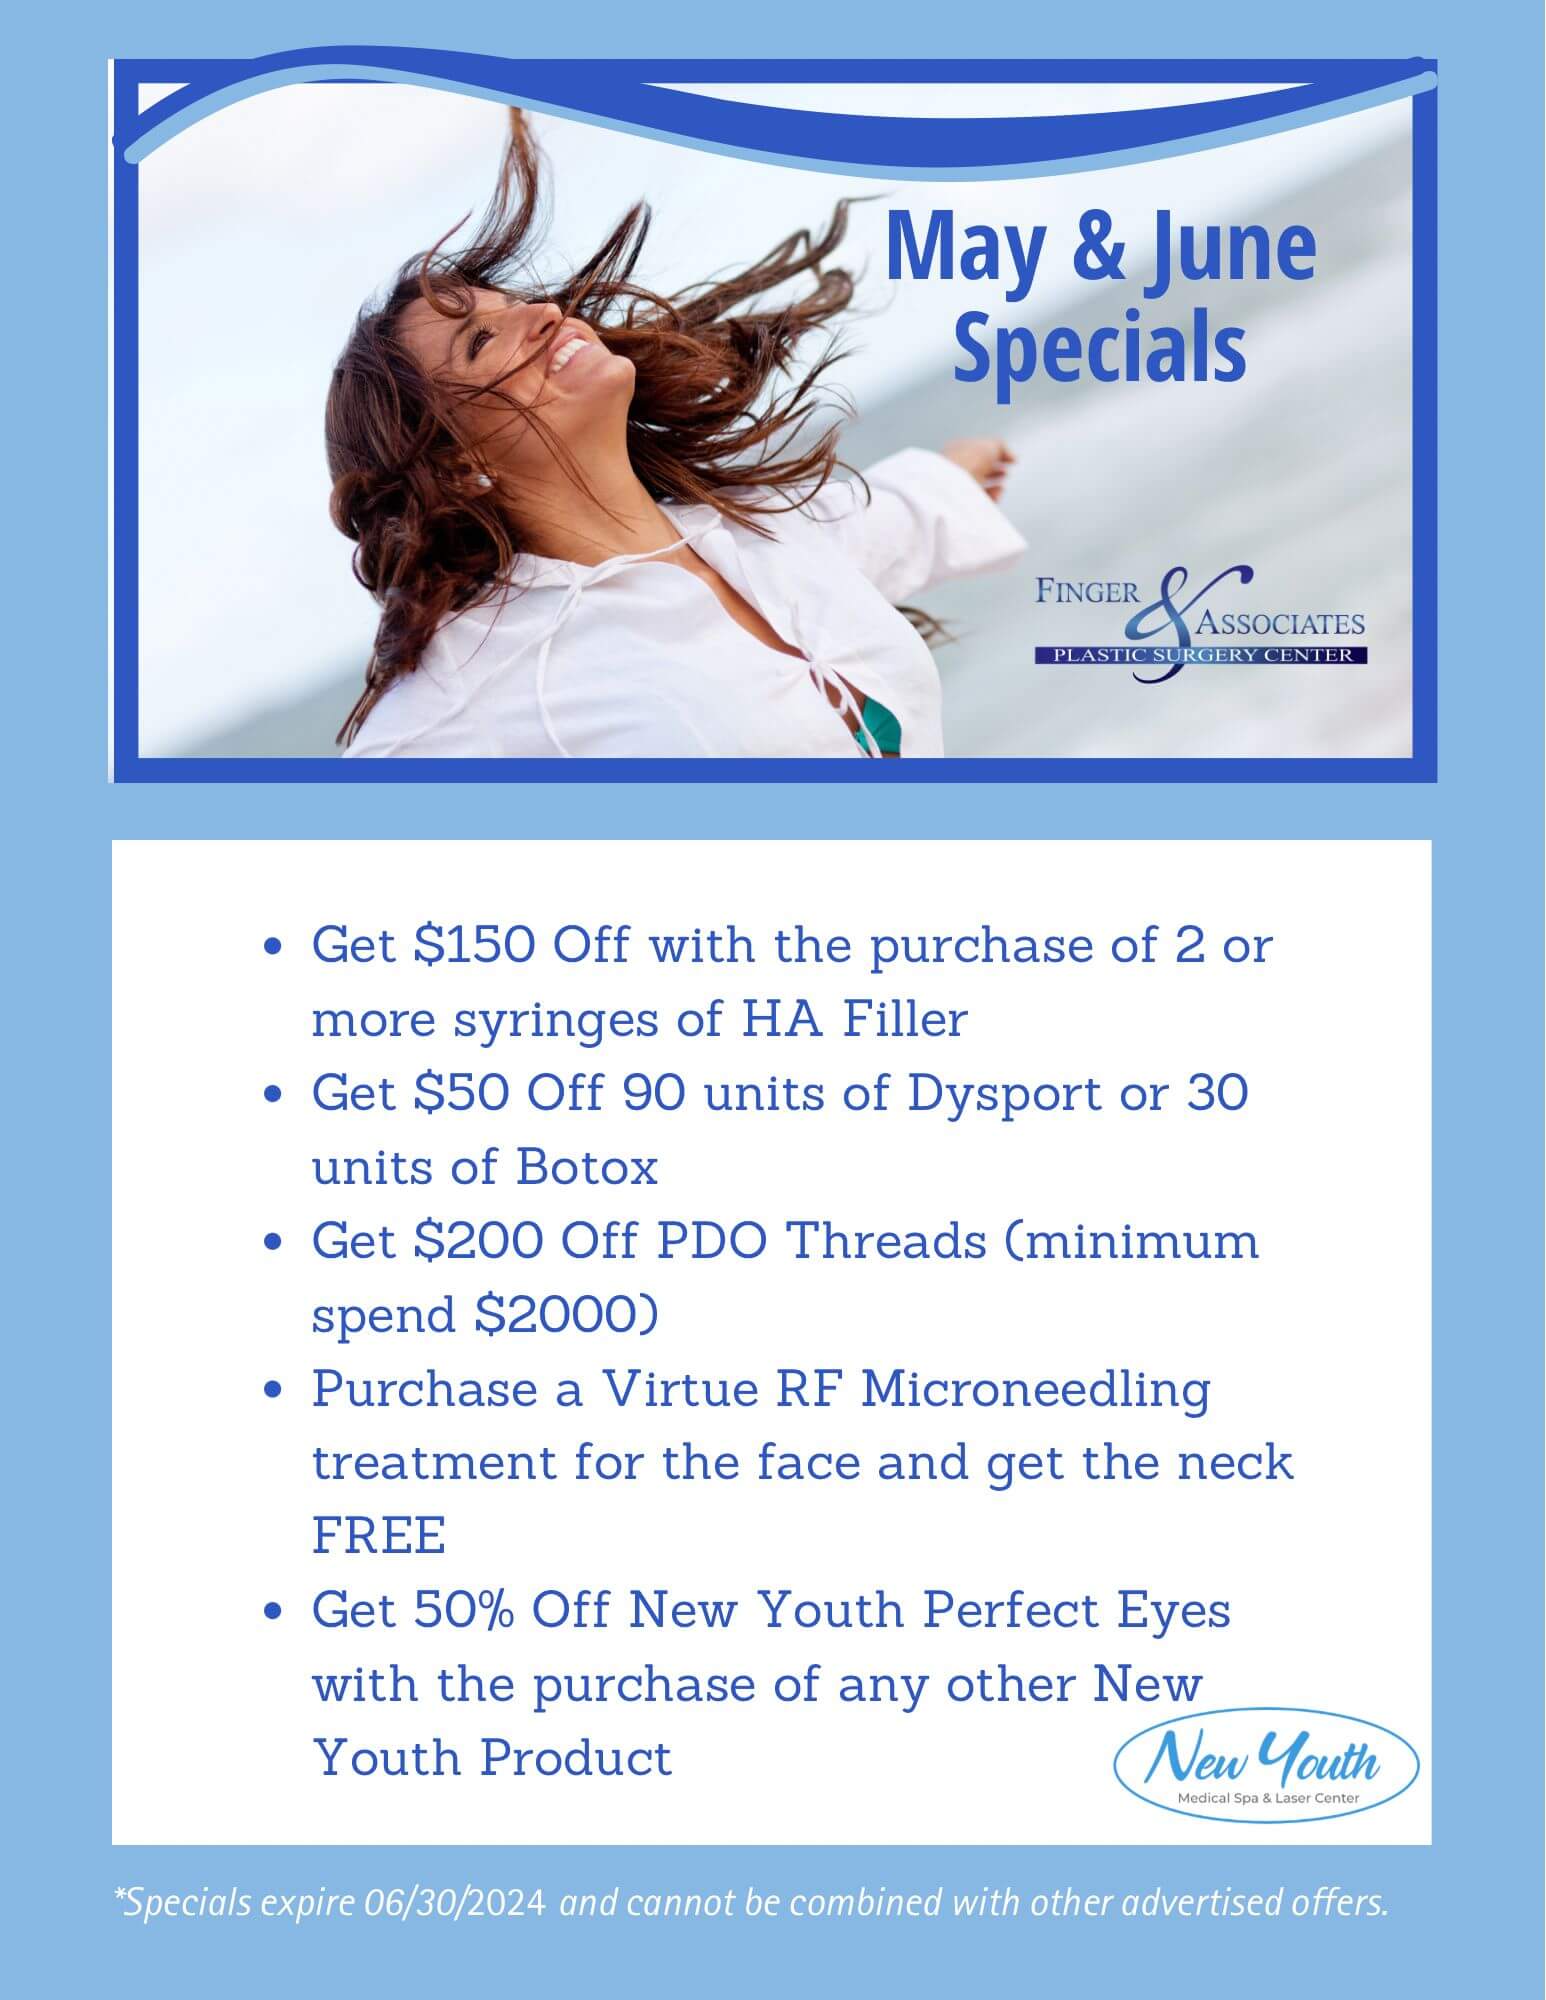 May and June Specials at Finger and Associates